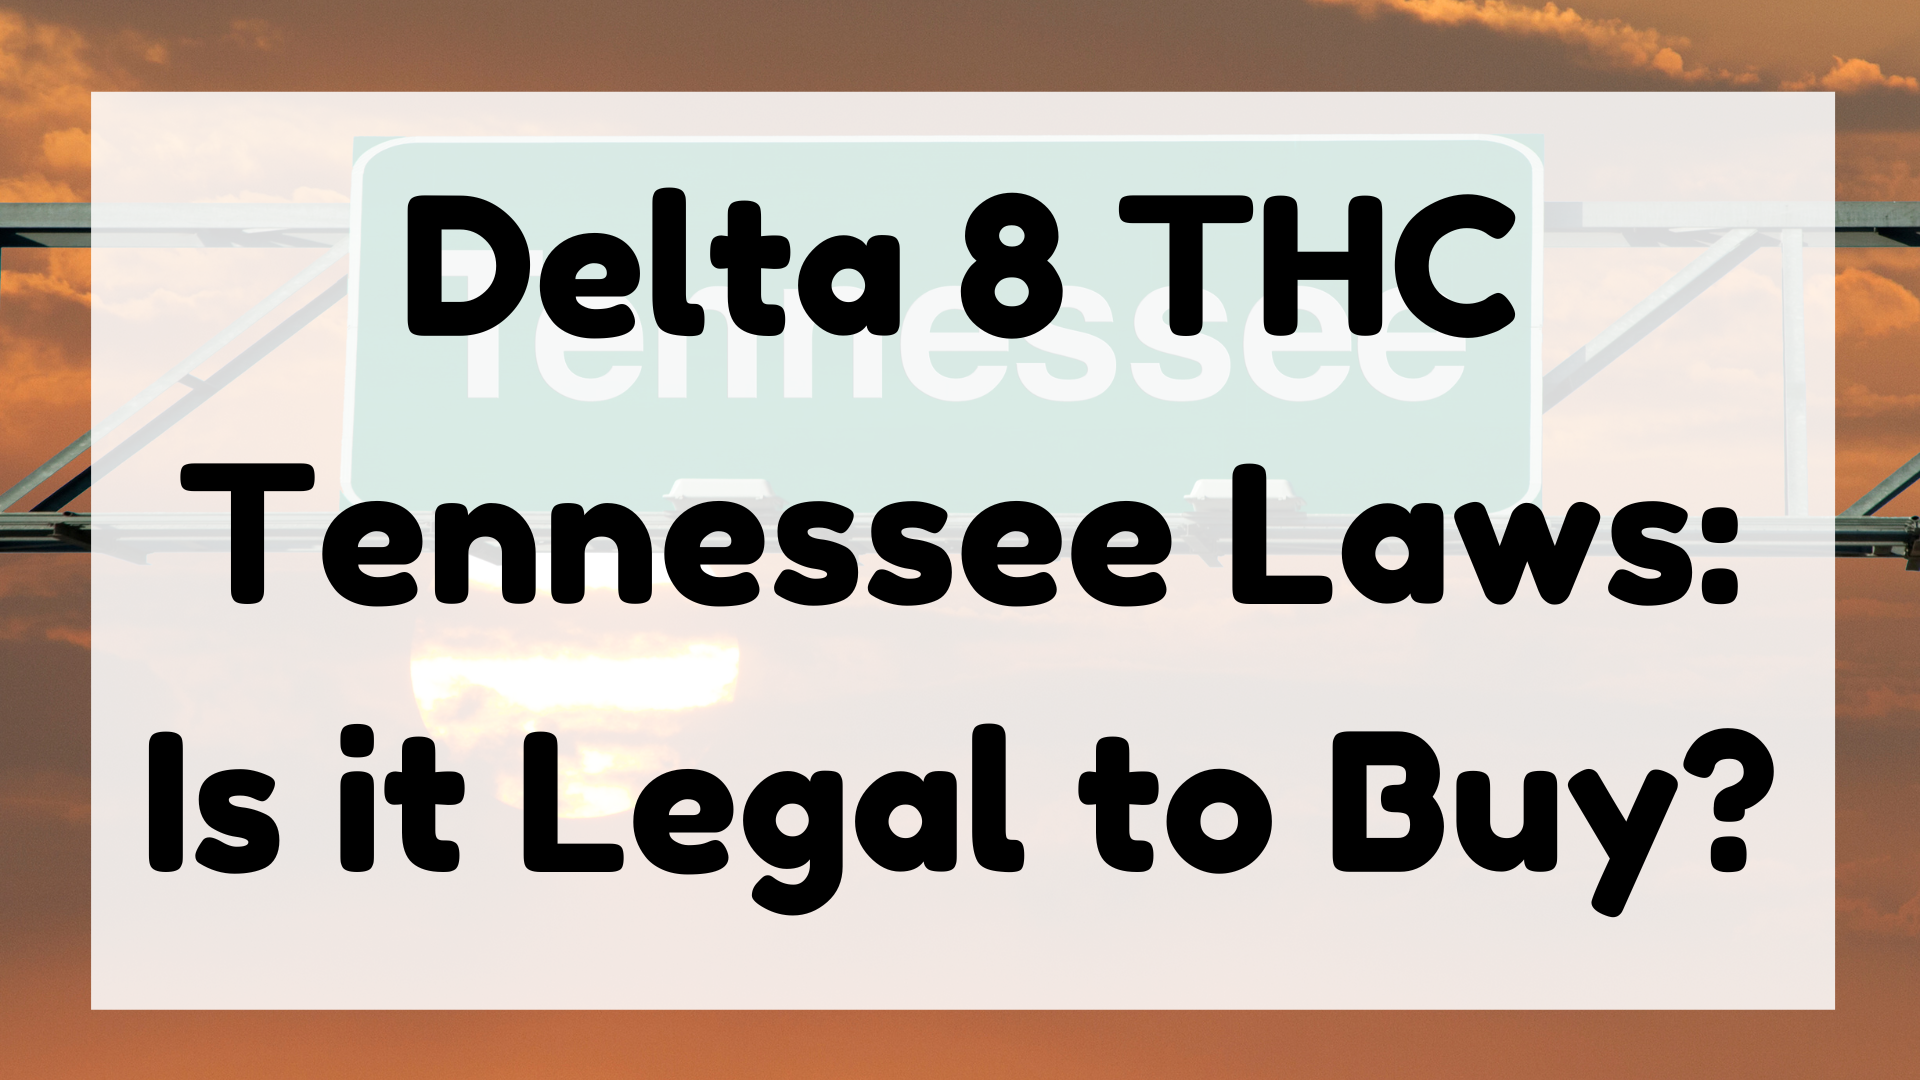 Delta 8 THC Tennessee Laws featured image